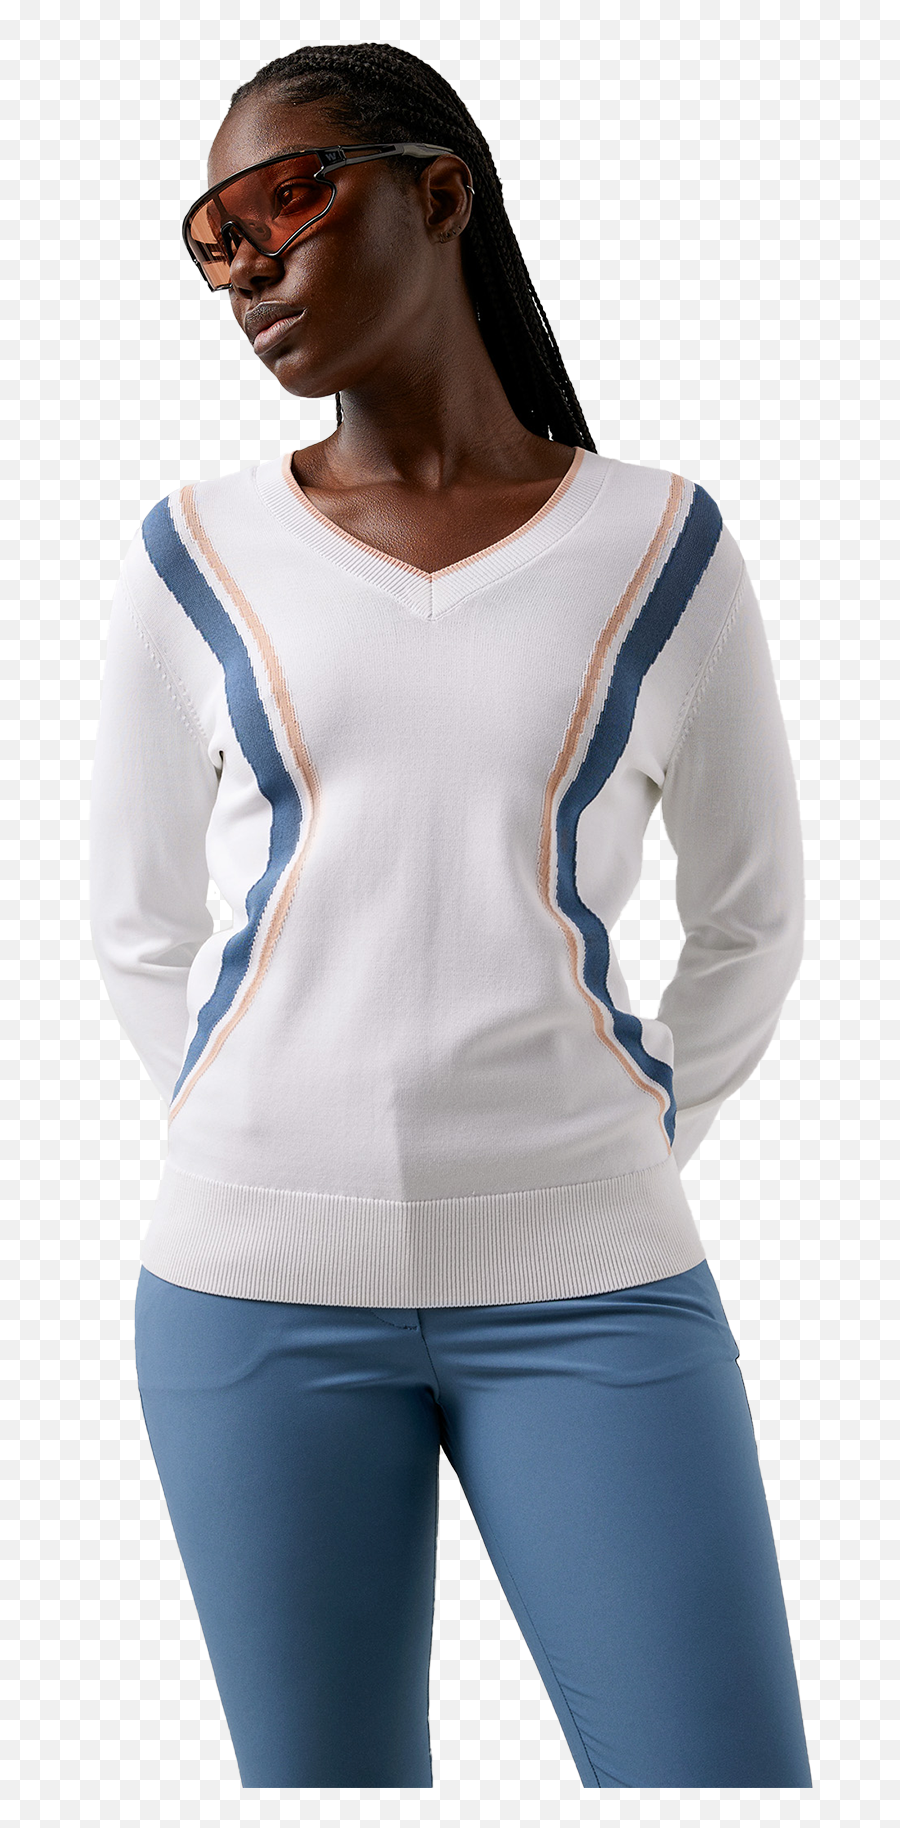 J Lindeberg Bianca V - Neck Golf Sweater Pga Tour Superstore For Women Png,Fj Icon Spikeless